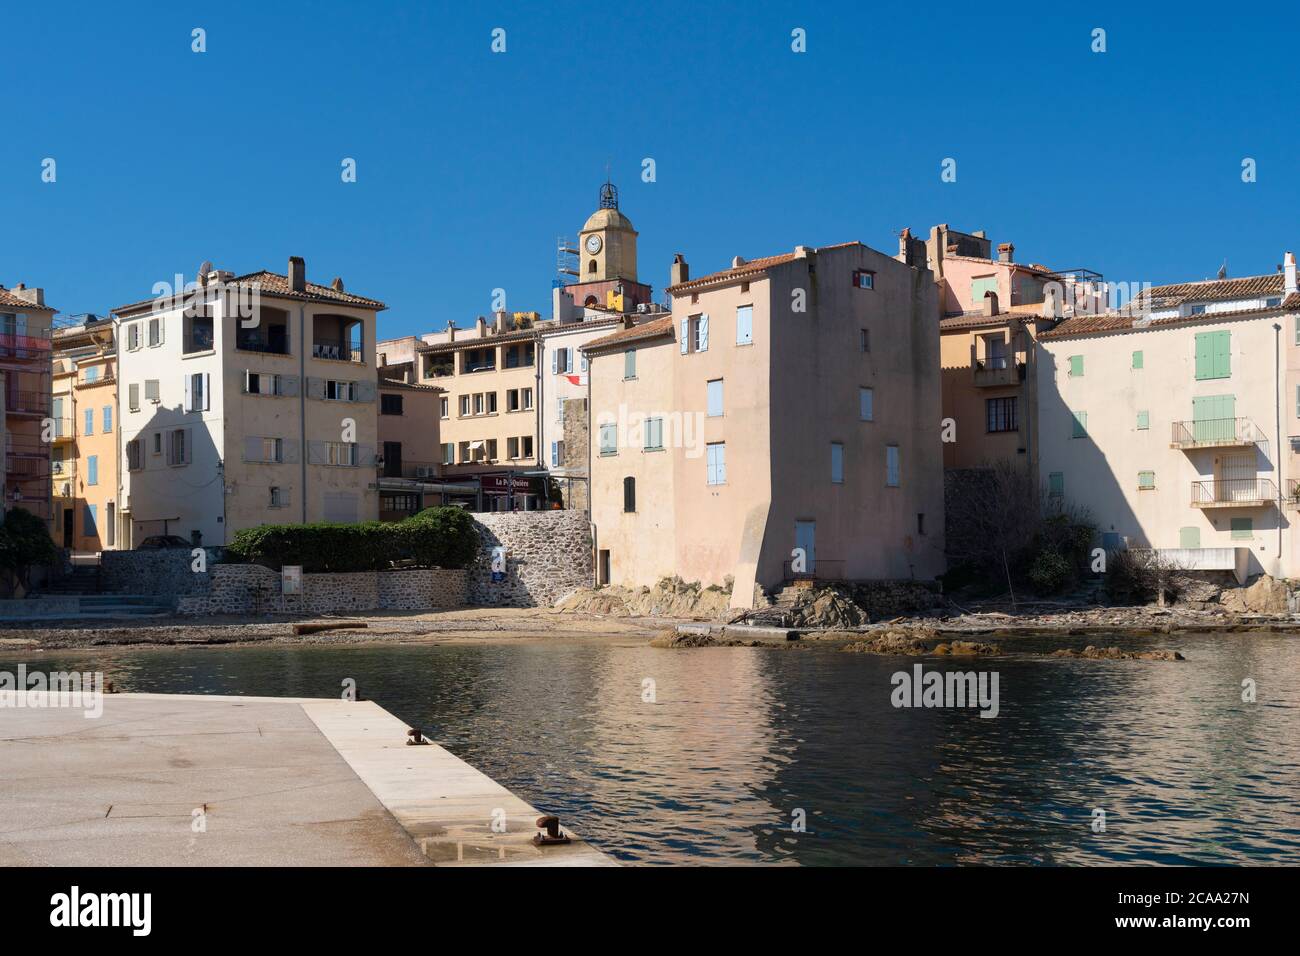 the famous village of St. Tropez located on French riviera in Var department. la ponche beach Stock Photo